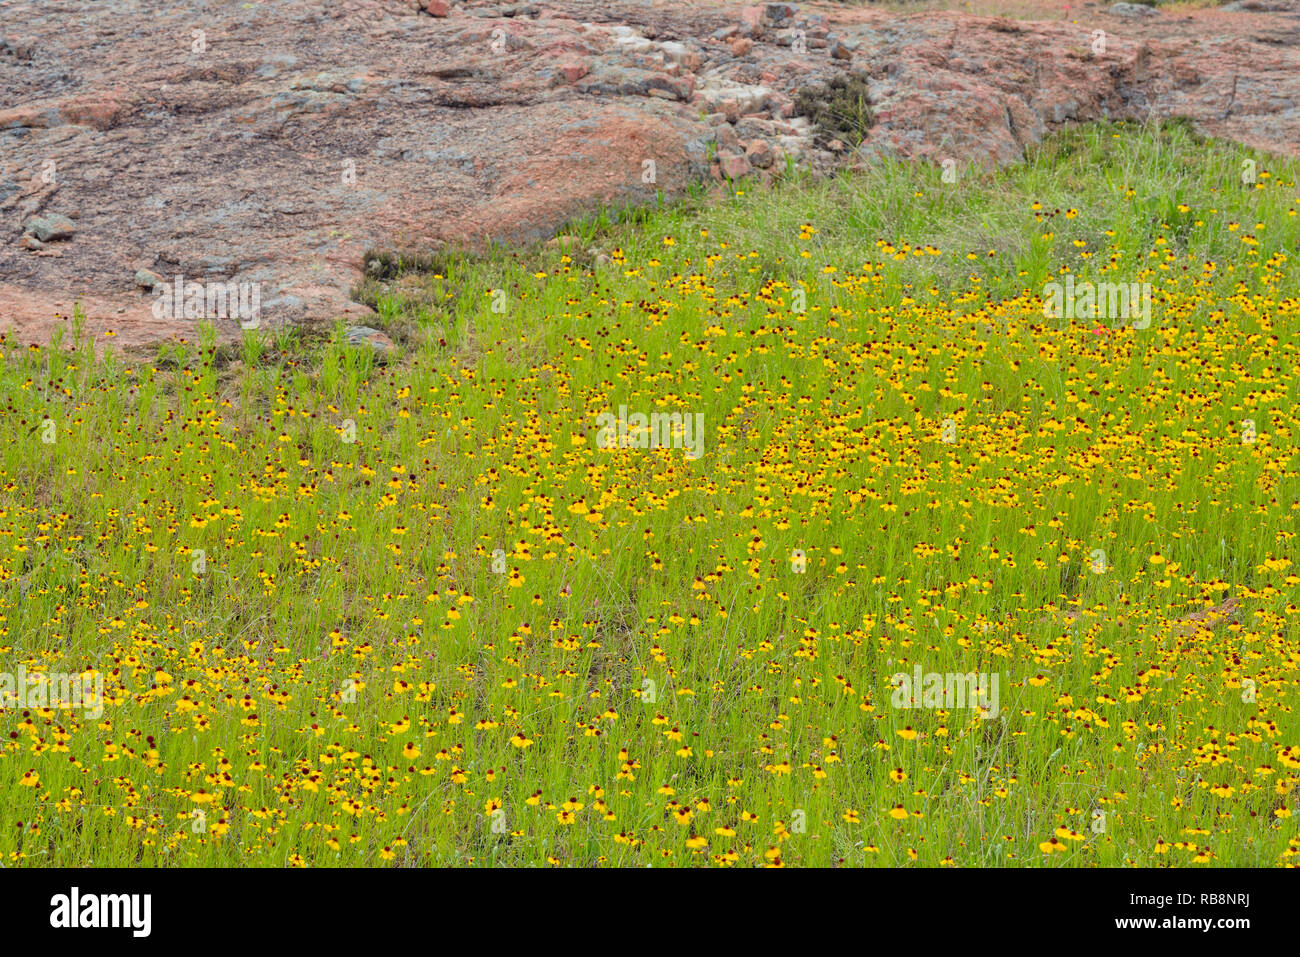 Rock outcrops and flowering bitter weed, Willow City, Texas, USA Stock Photo